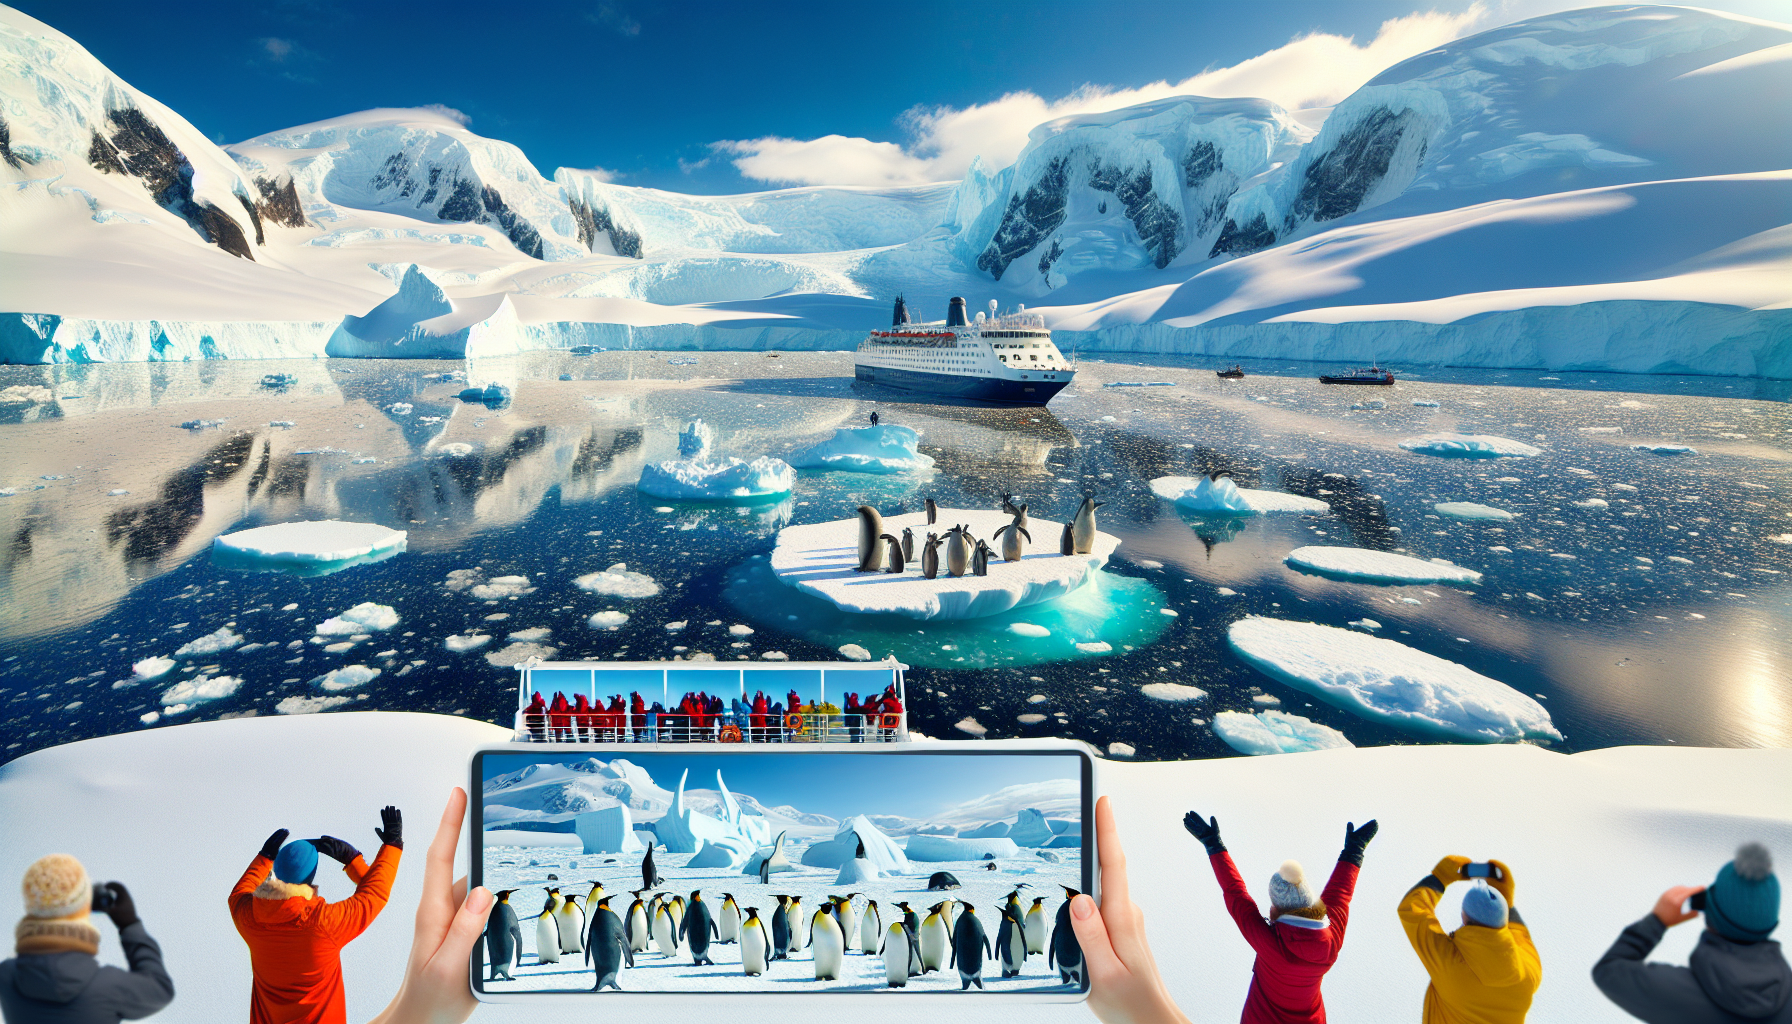 discover the extraordinary with antarctic travel and cruises. find out what sets us apart with our expertly curated itineraries and unparalleled experiences.